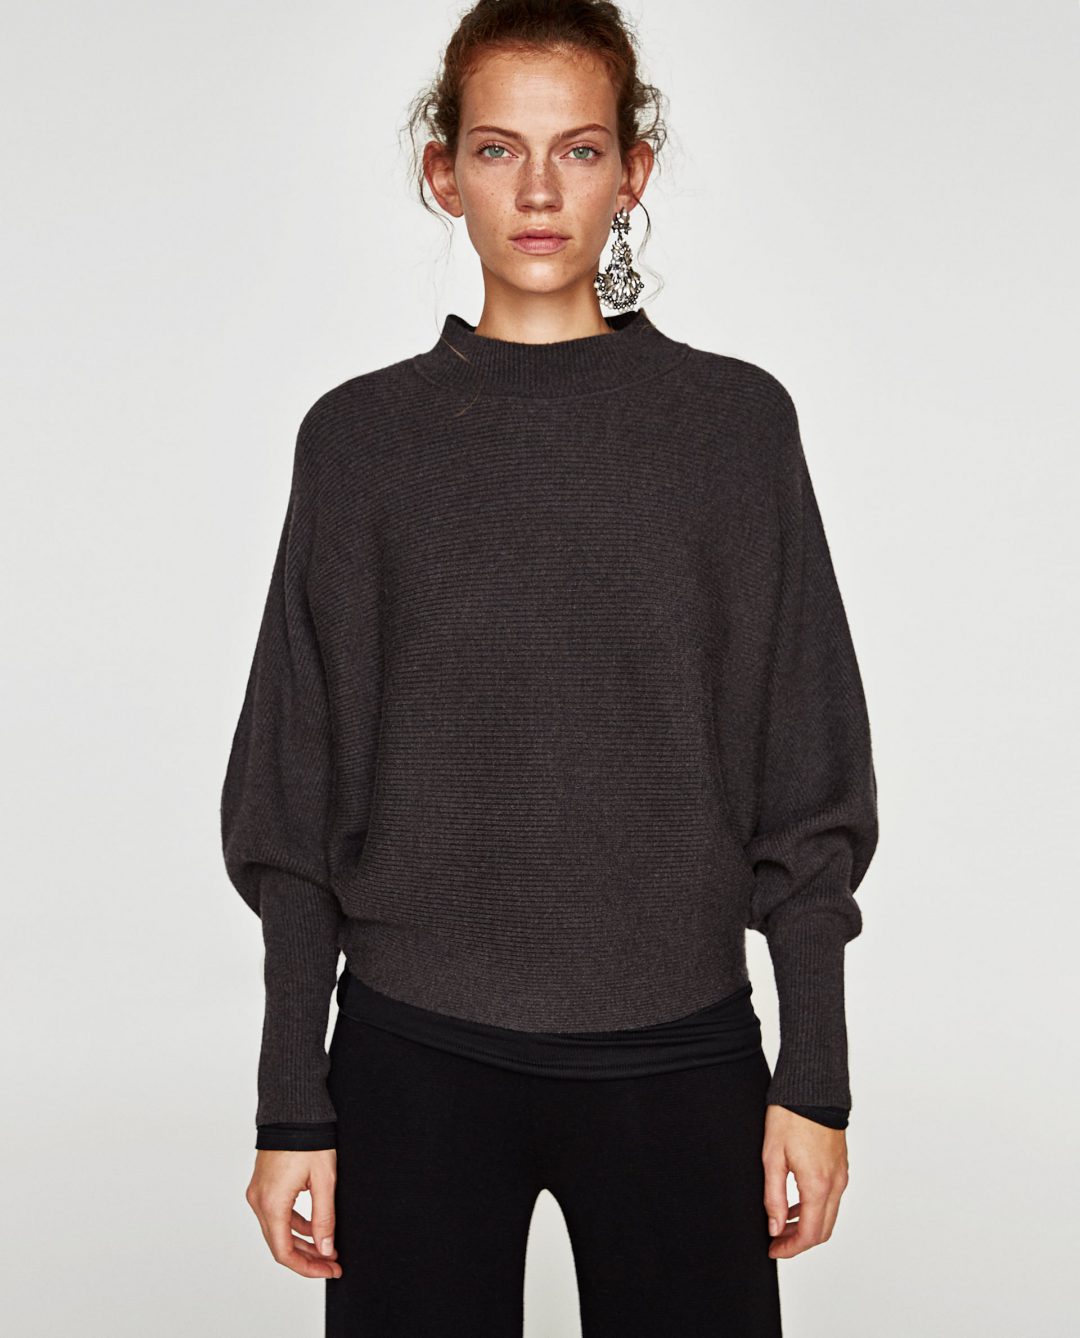 37 Sweaters Under $100 Perfect for Cozying Up or Going Out – Milk & Flowers